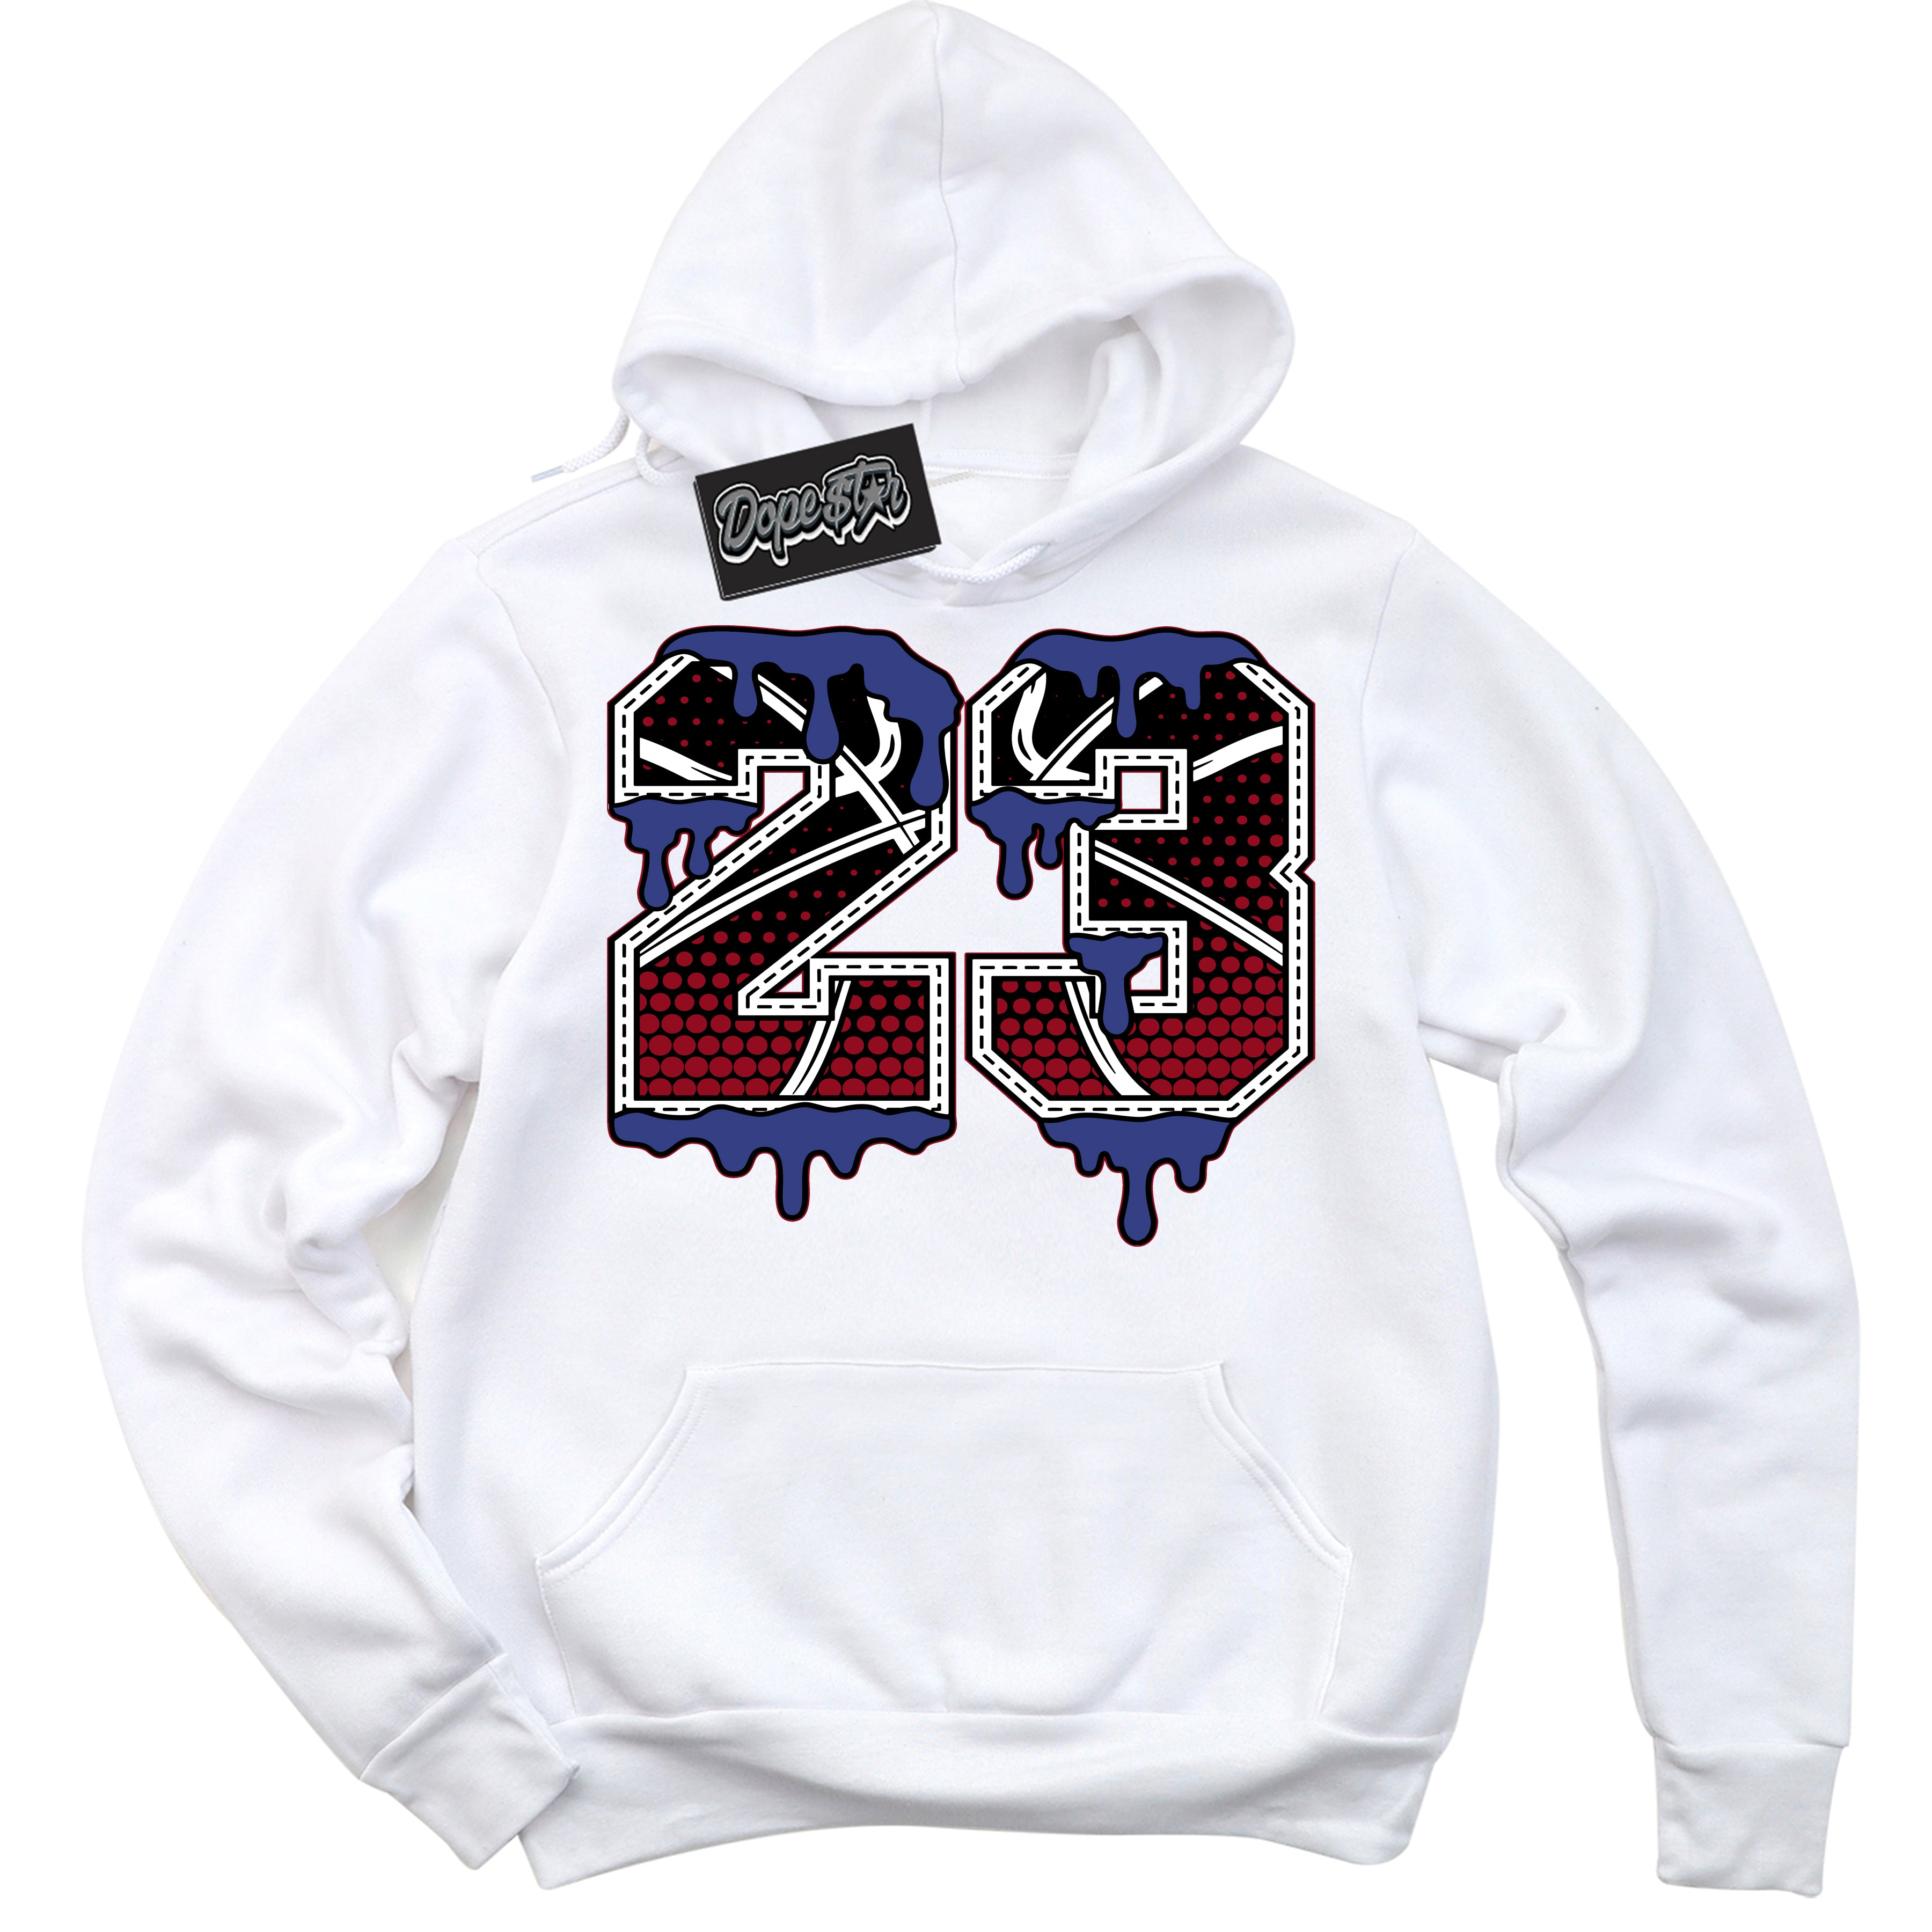 Cool White Hoodie with “ 23 Ball ”  design that Perfectly Matches Playoffs 8s Sneakers.